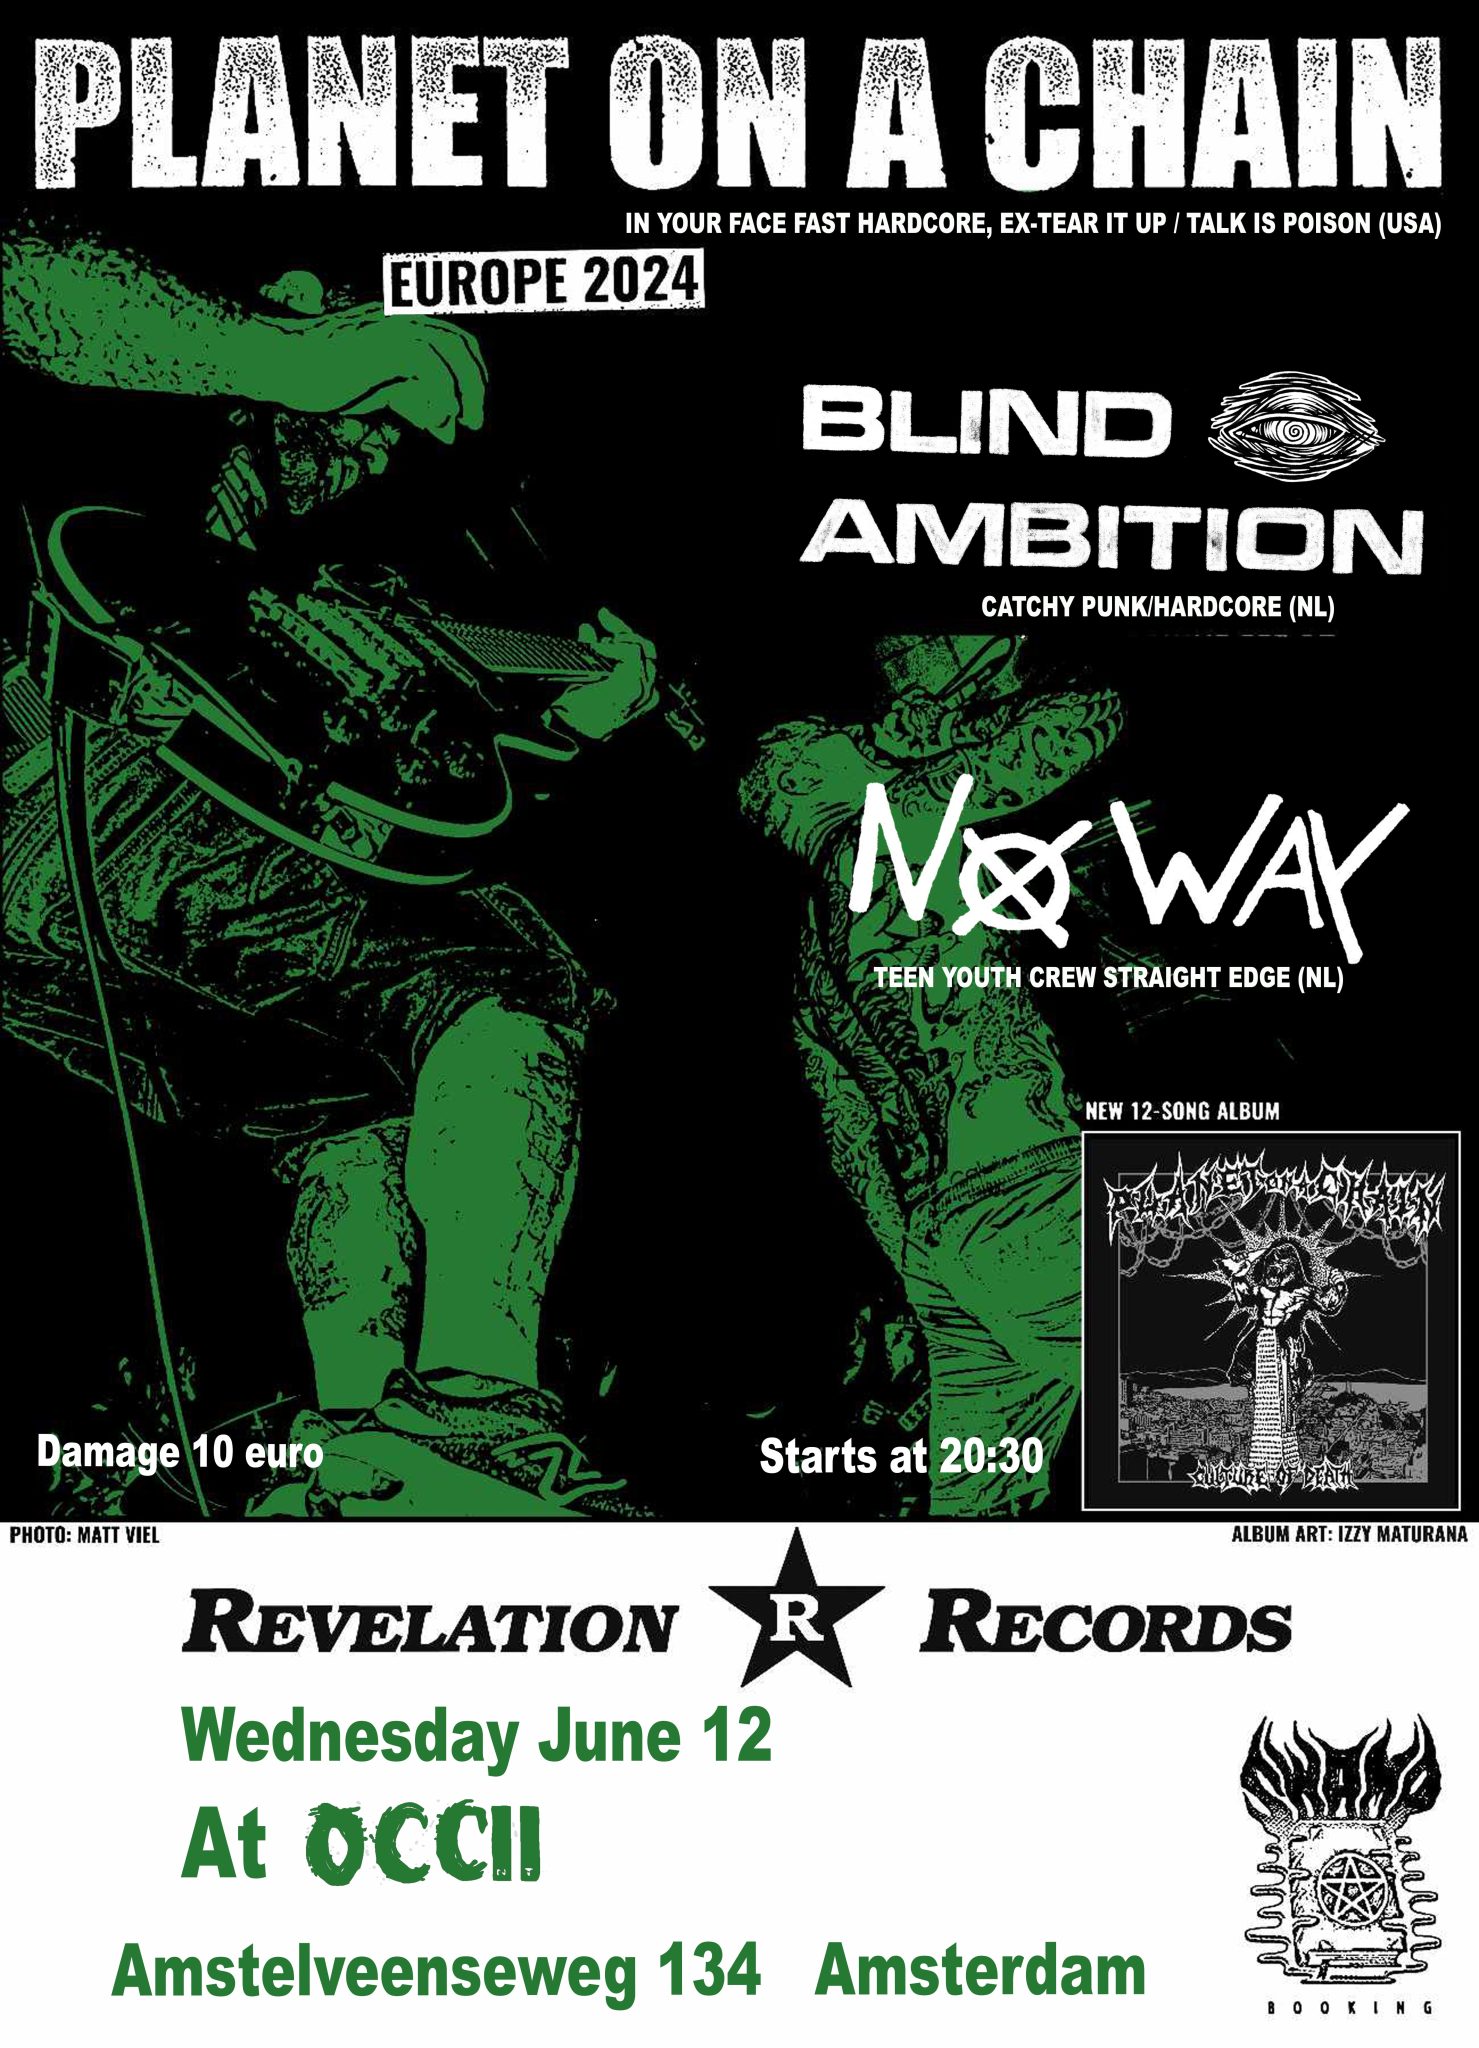 Planet On A Chain (US) + No Way + Blind Ambition